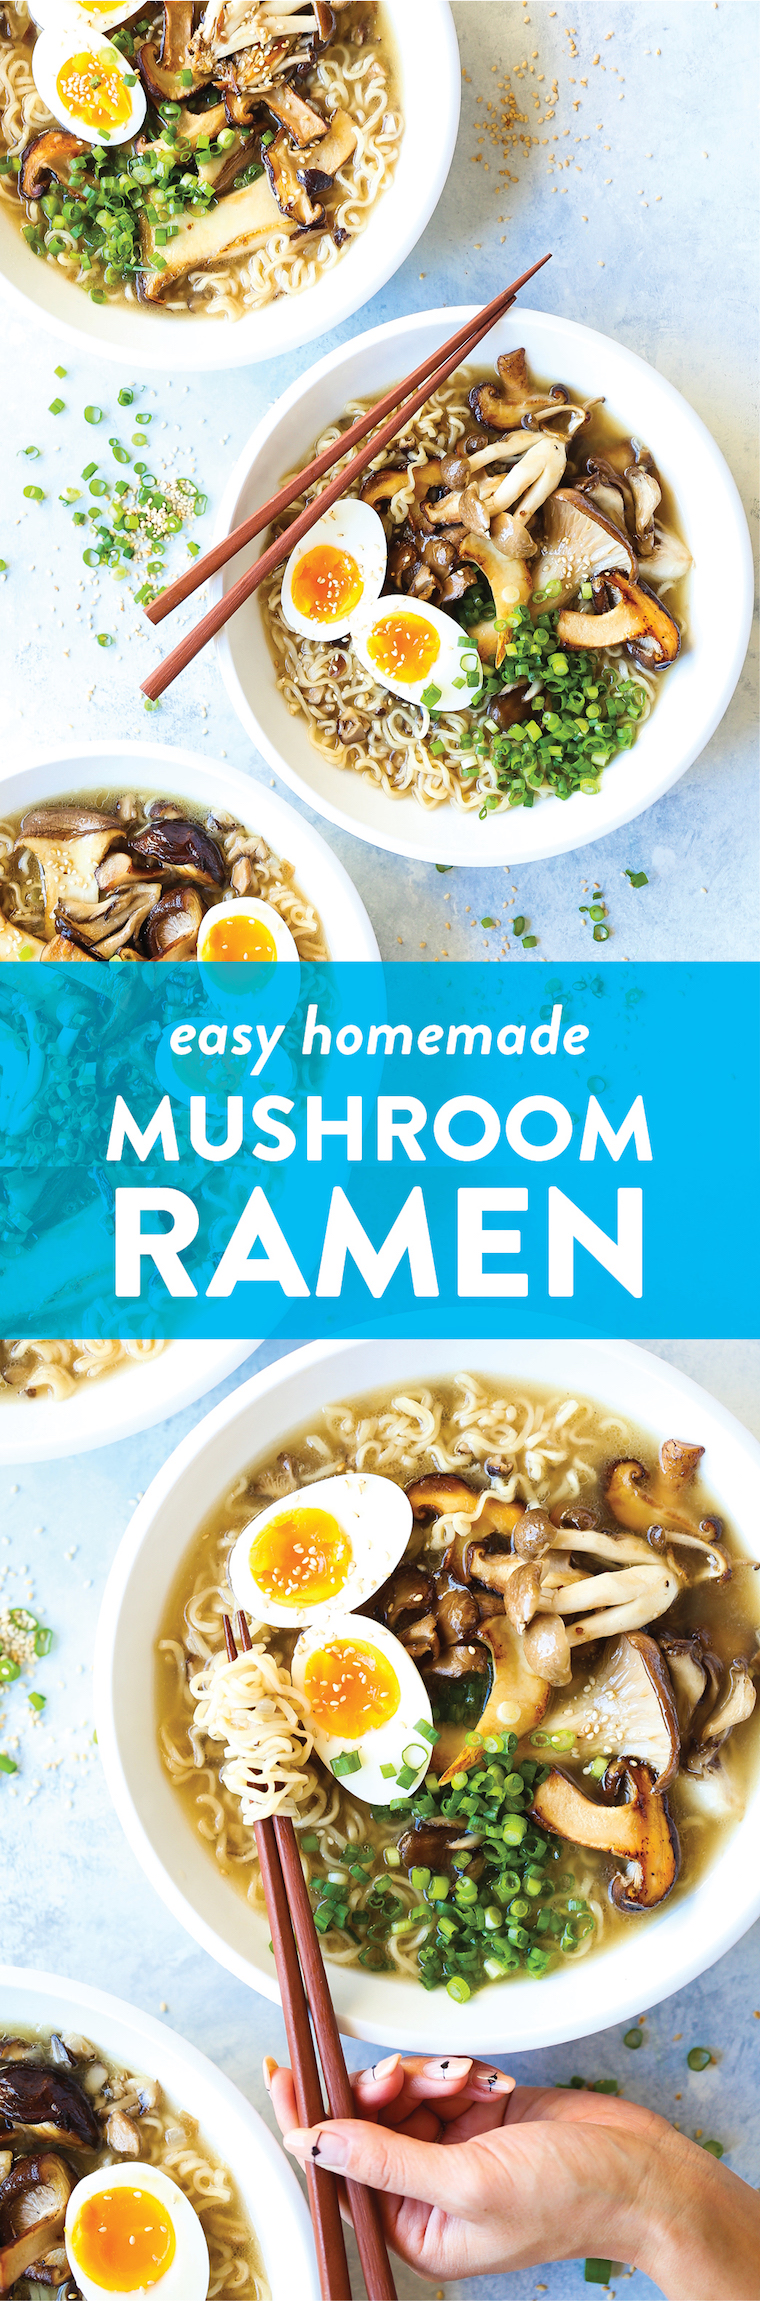 Mushroom Ramen - Restaurant-quality ramen you can make at home! With a perfectly seasoned mushroom broth, you'll never order this out again. It's THAT good!